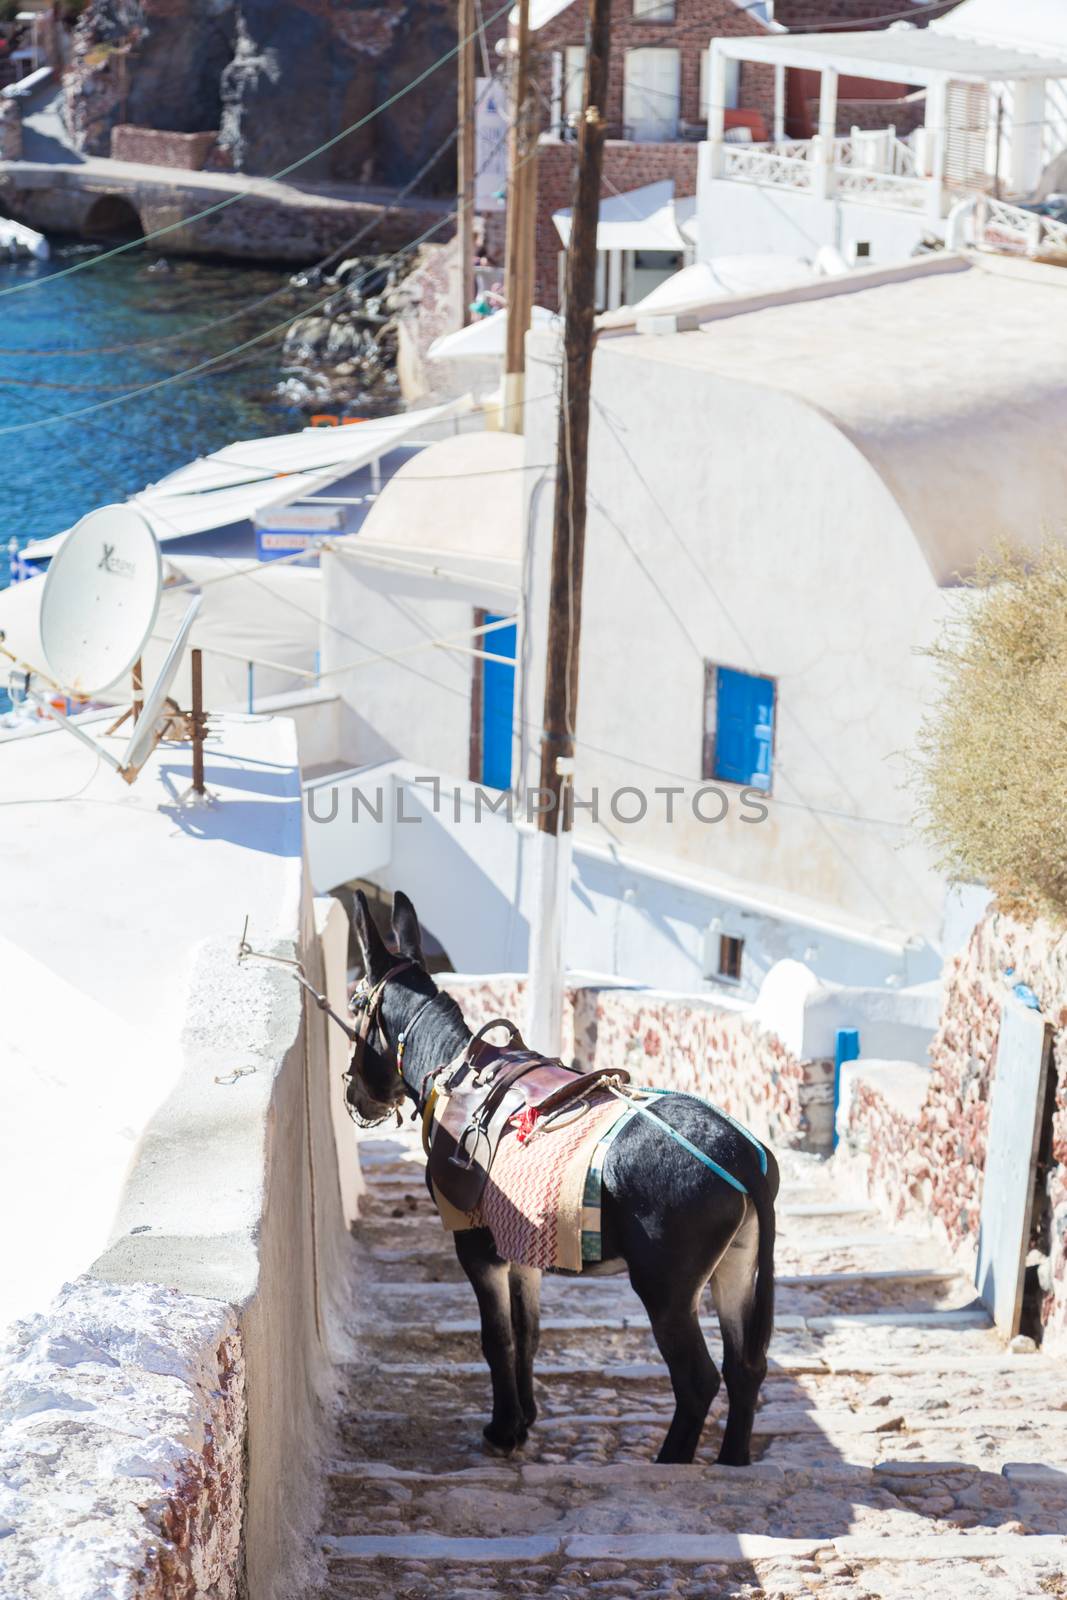 Donkeys or mule that works as tourist taxis on the island of Santorini, Cyclades, Greece.